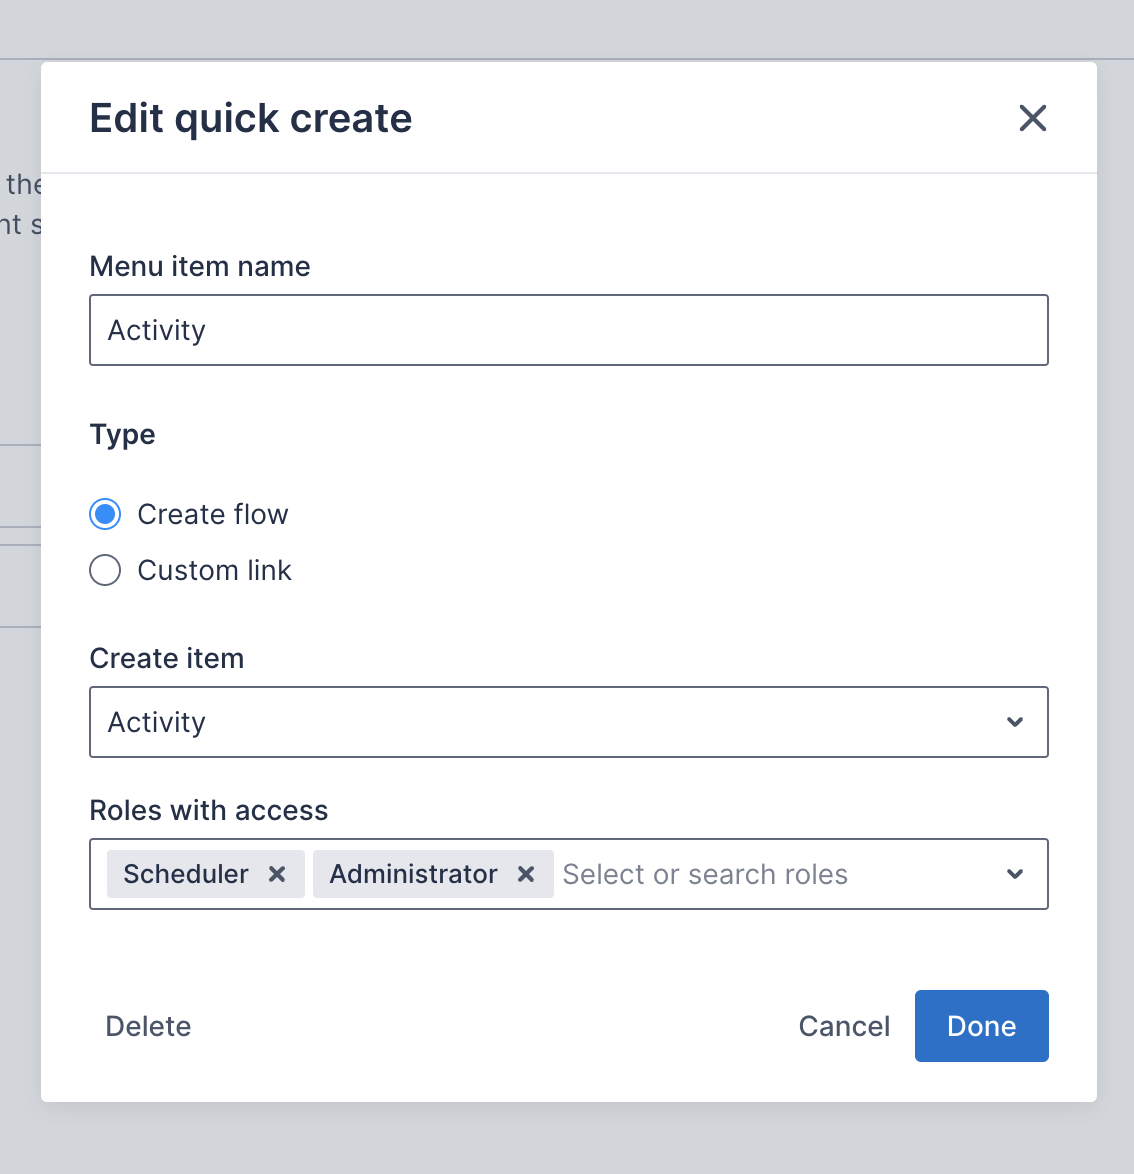 The Add quick-create menu item dialog for create flow items.